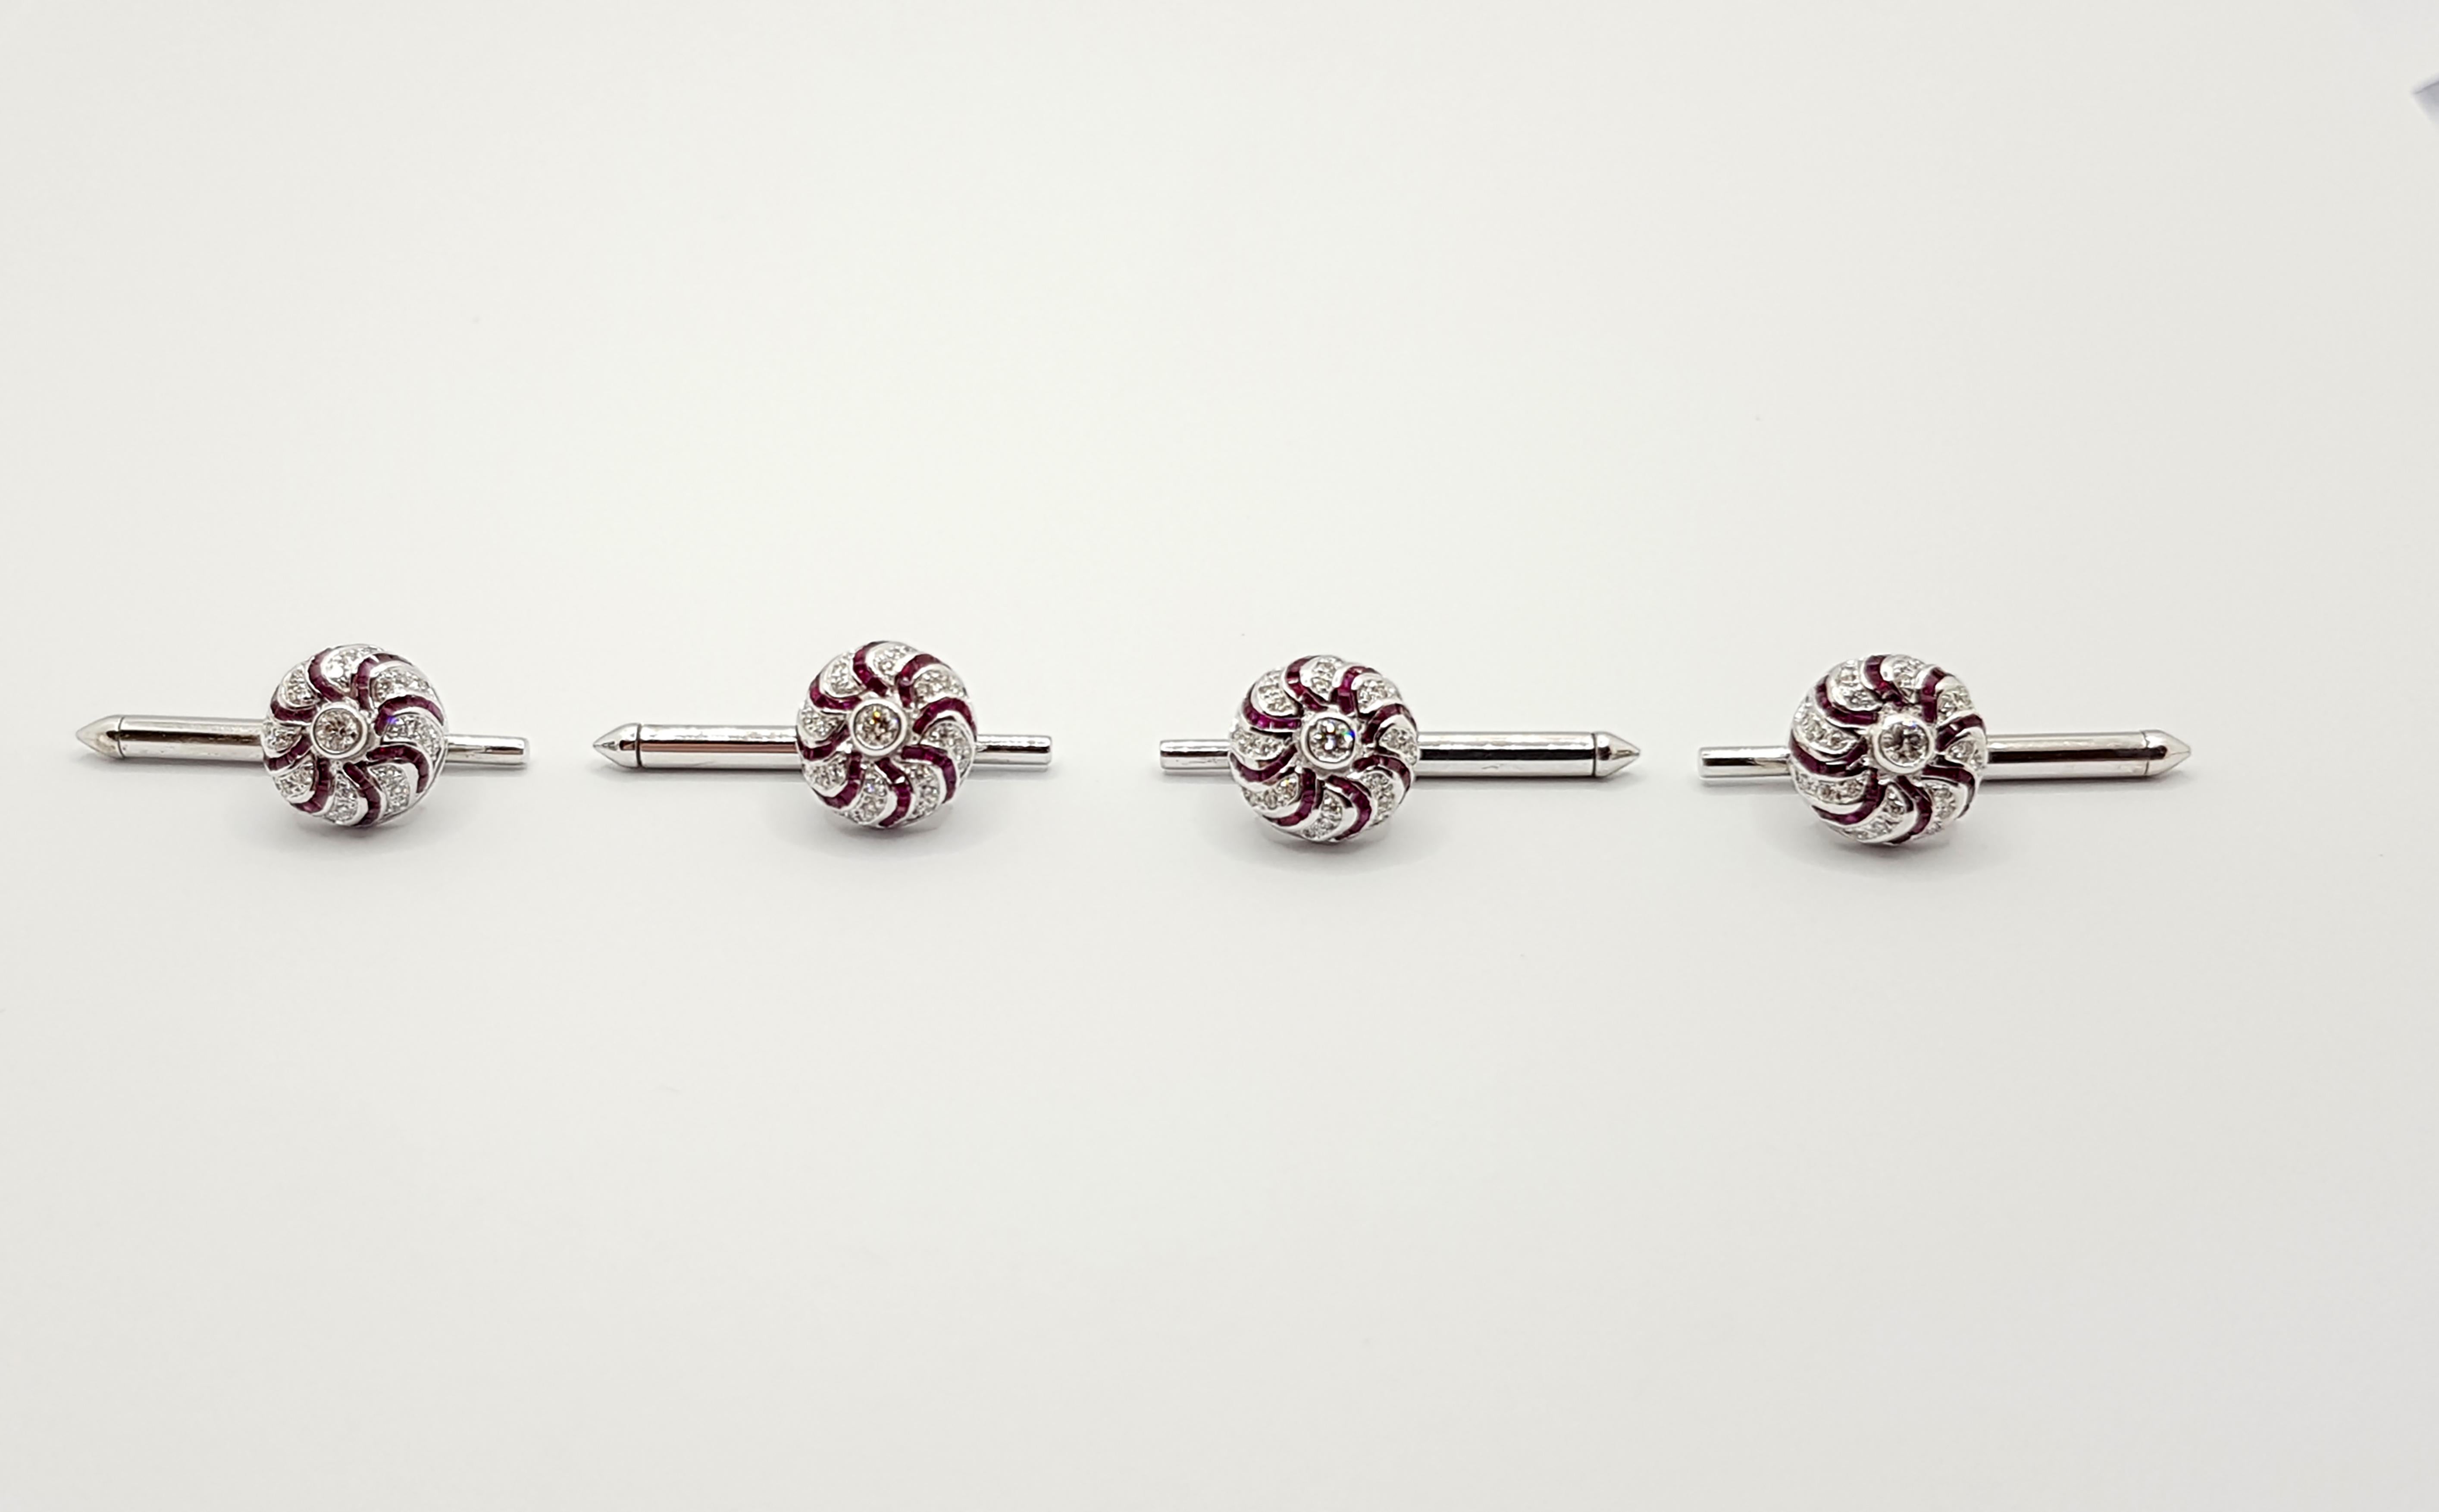 Ruby 4.01 carats with Diamond 0.46 carat Tuxedo Buttons set in 18 Karat White Gold Settings (set of 4)

Width:  1.0 cm 
Length: 1.0 cm
Total Weight: 11.28 grams

